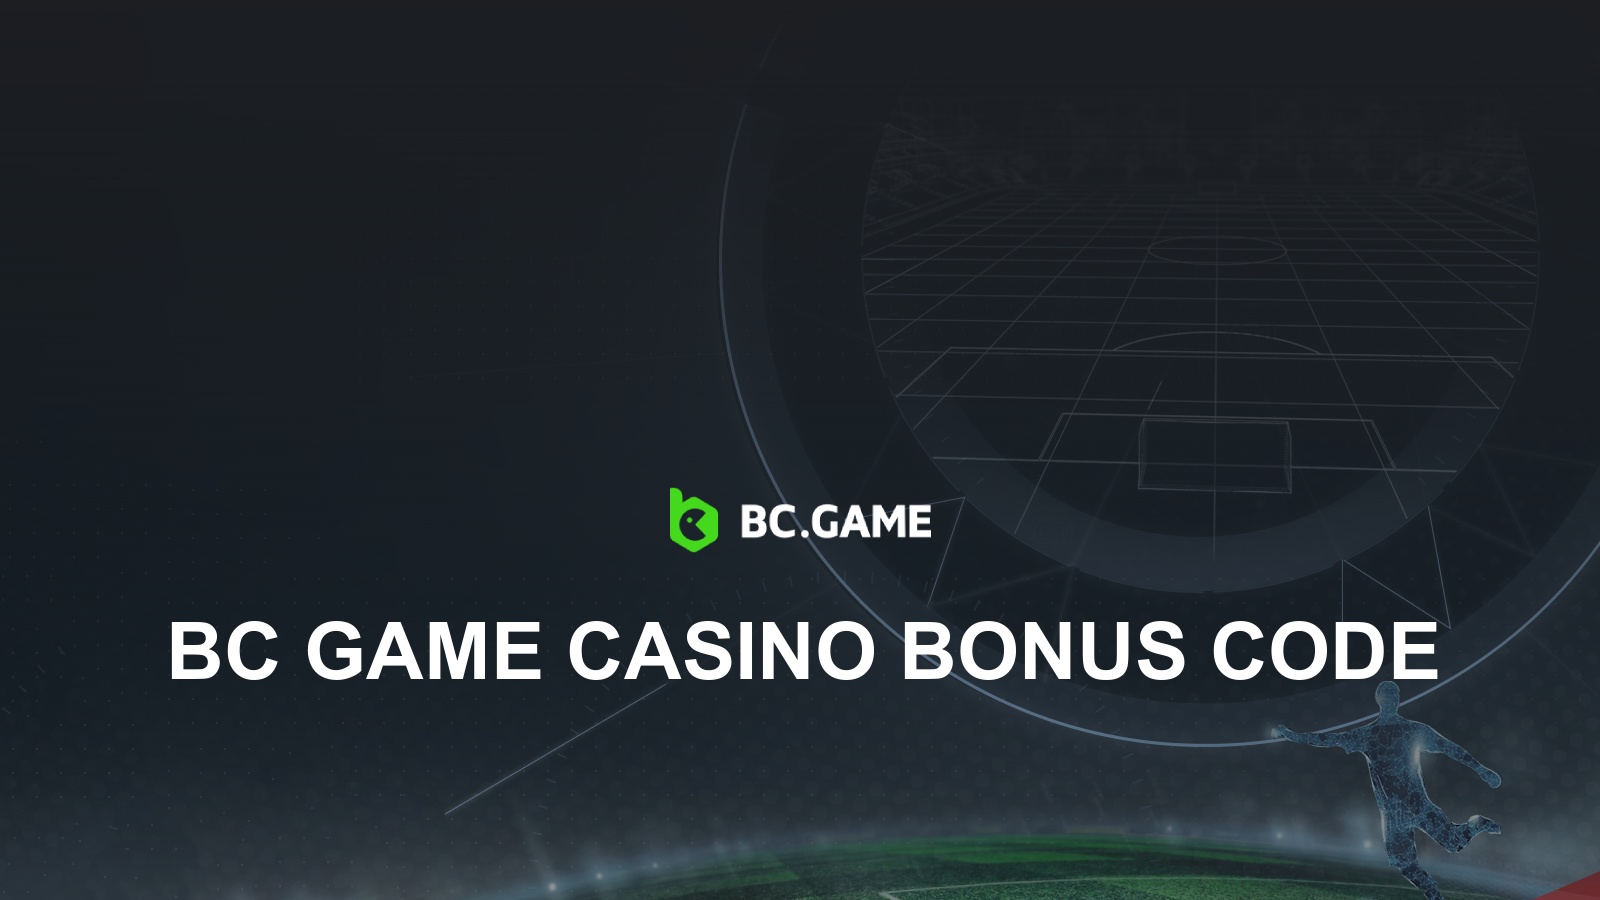 The A-Z Guide Of BC.Game online casino in Nigeria